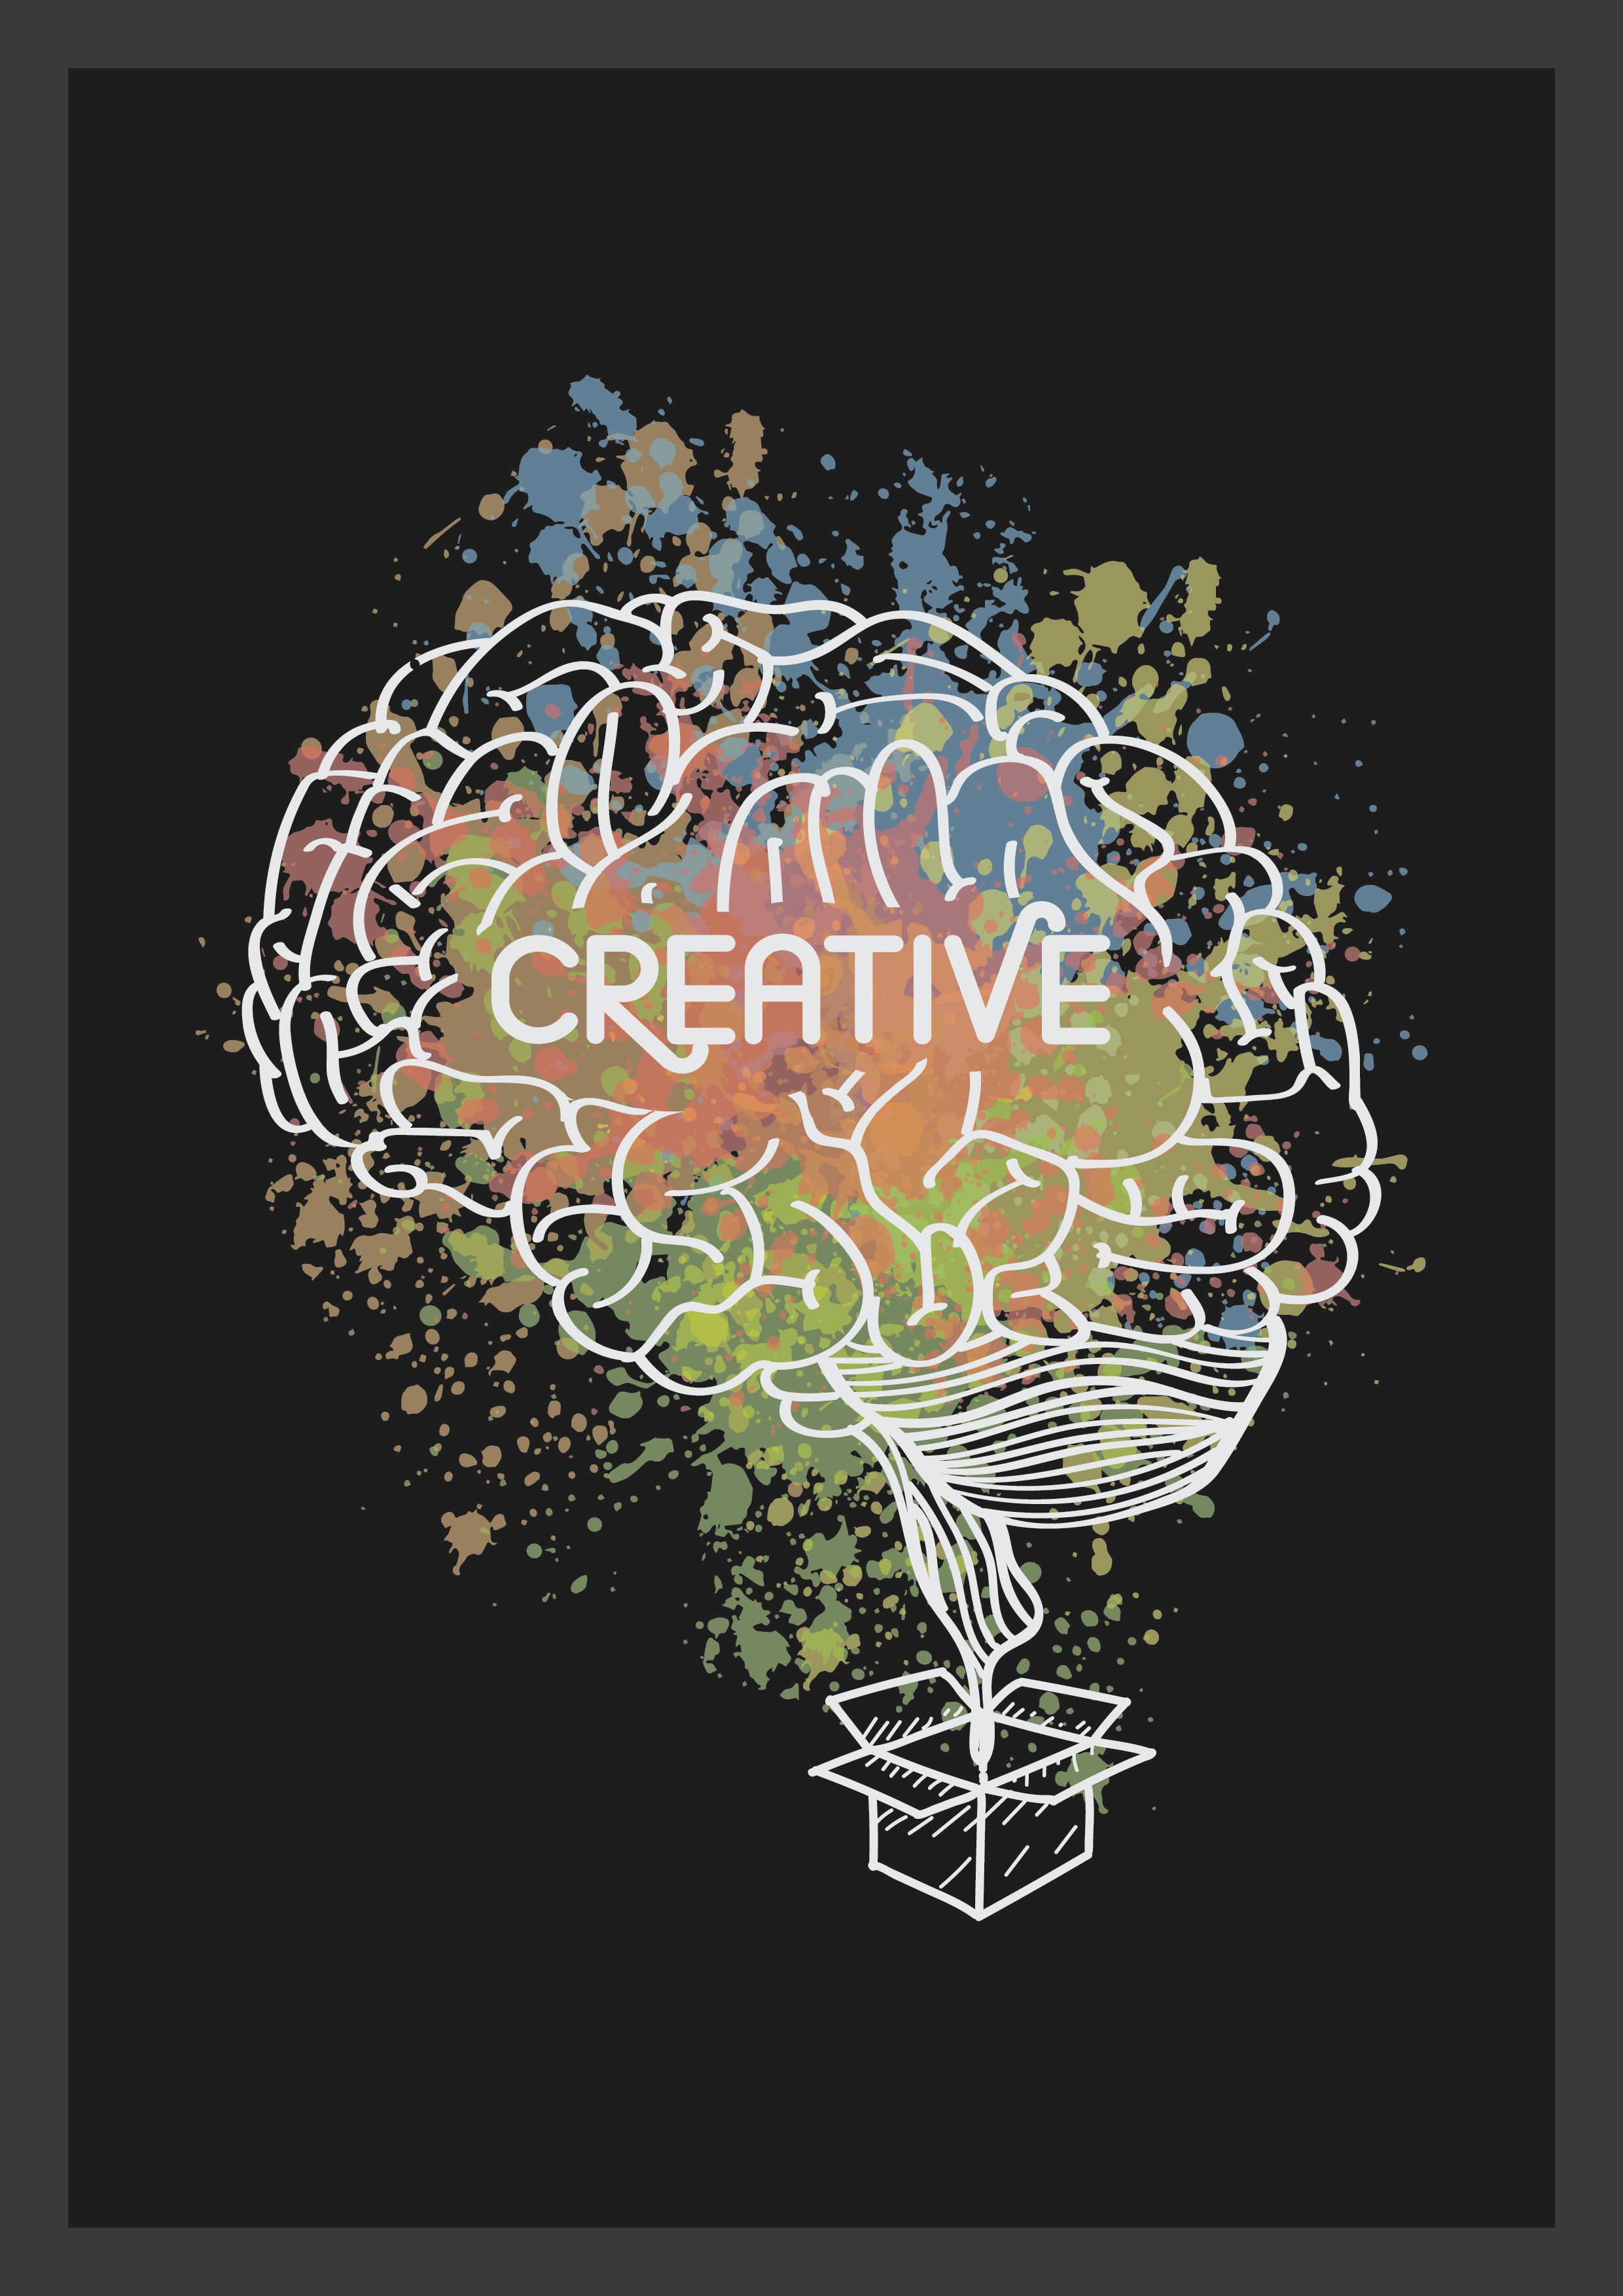 Creative thinking represented as a brain out of the box